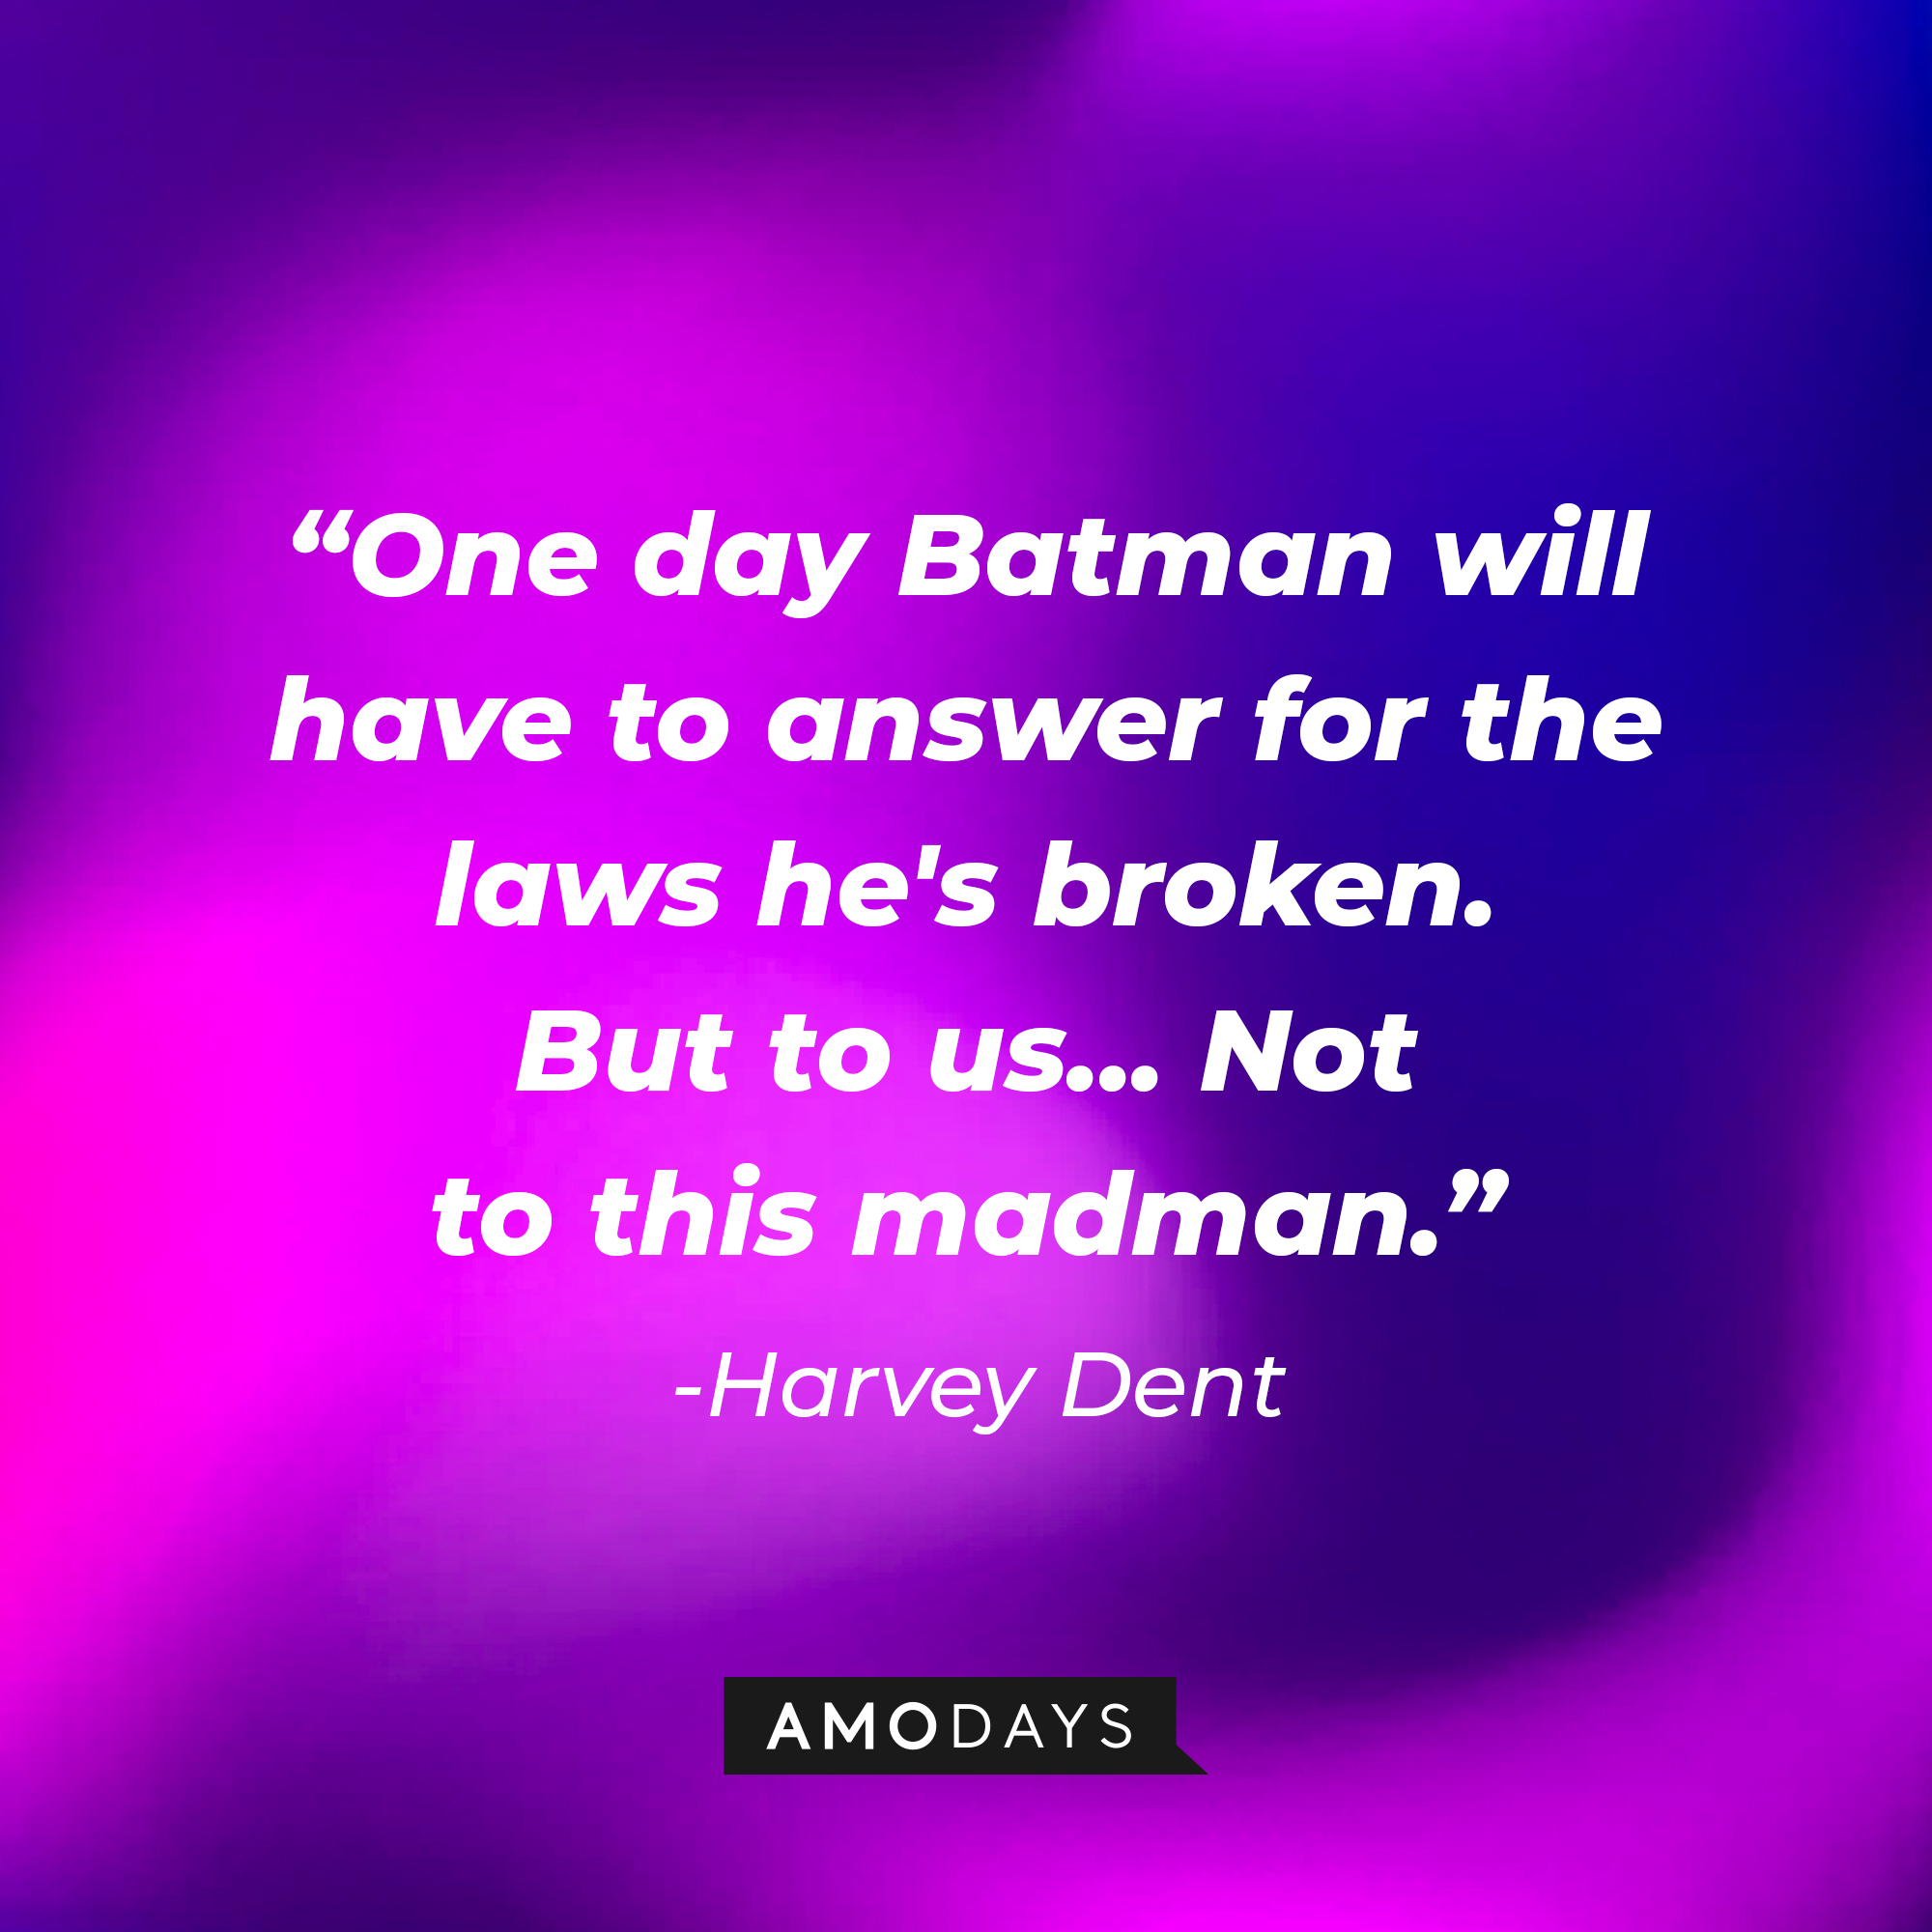 Harvey Dent's quote: “One day Batman will have to answer for the laws he's broken. But to us... Not to this madman.” | Source: facebook.com/darkknighttrilogy